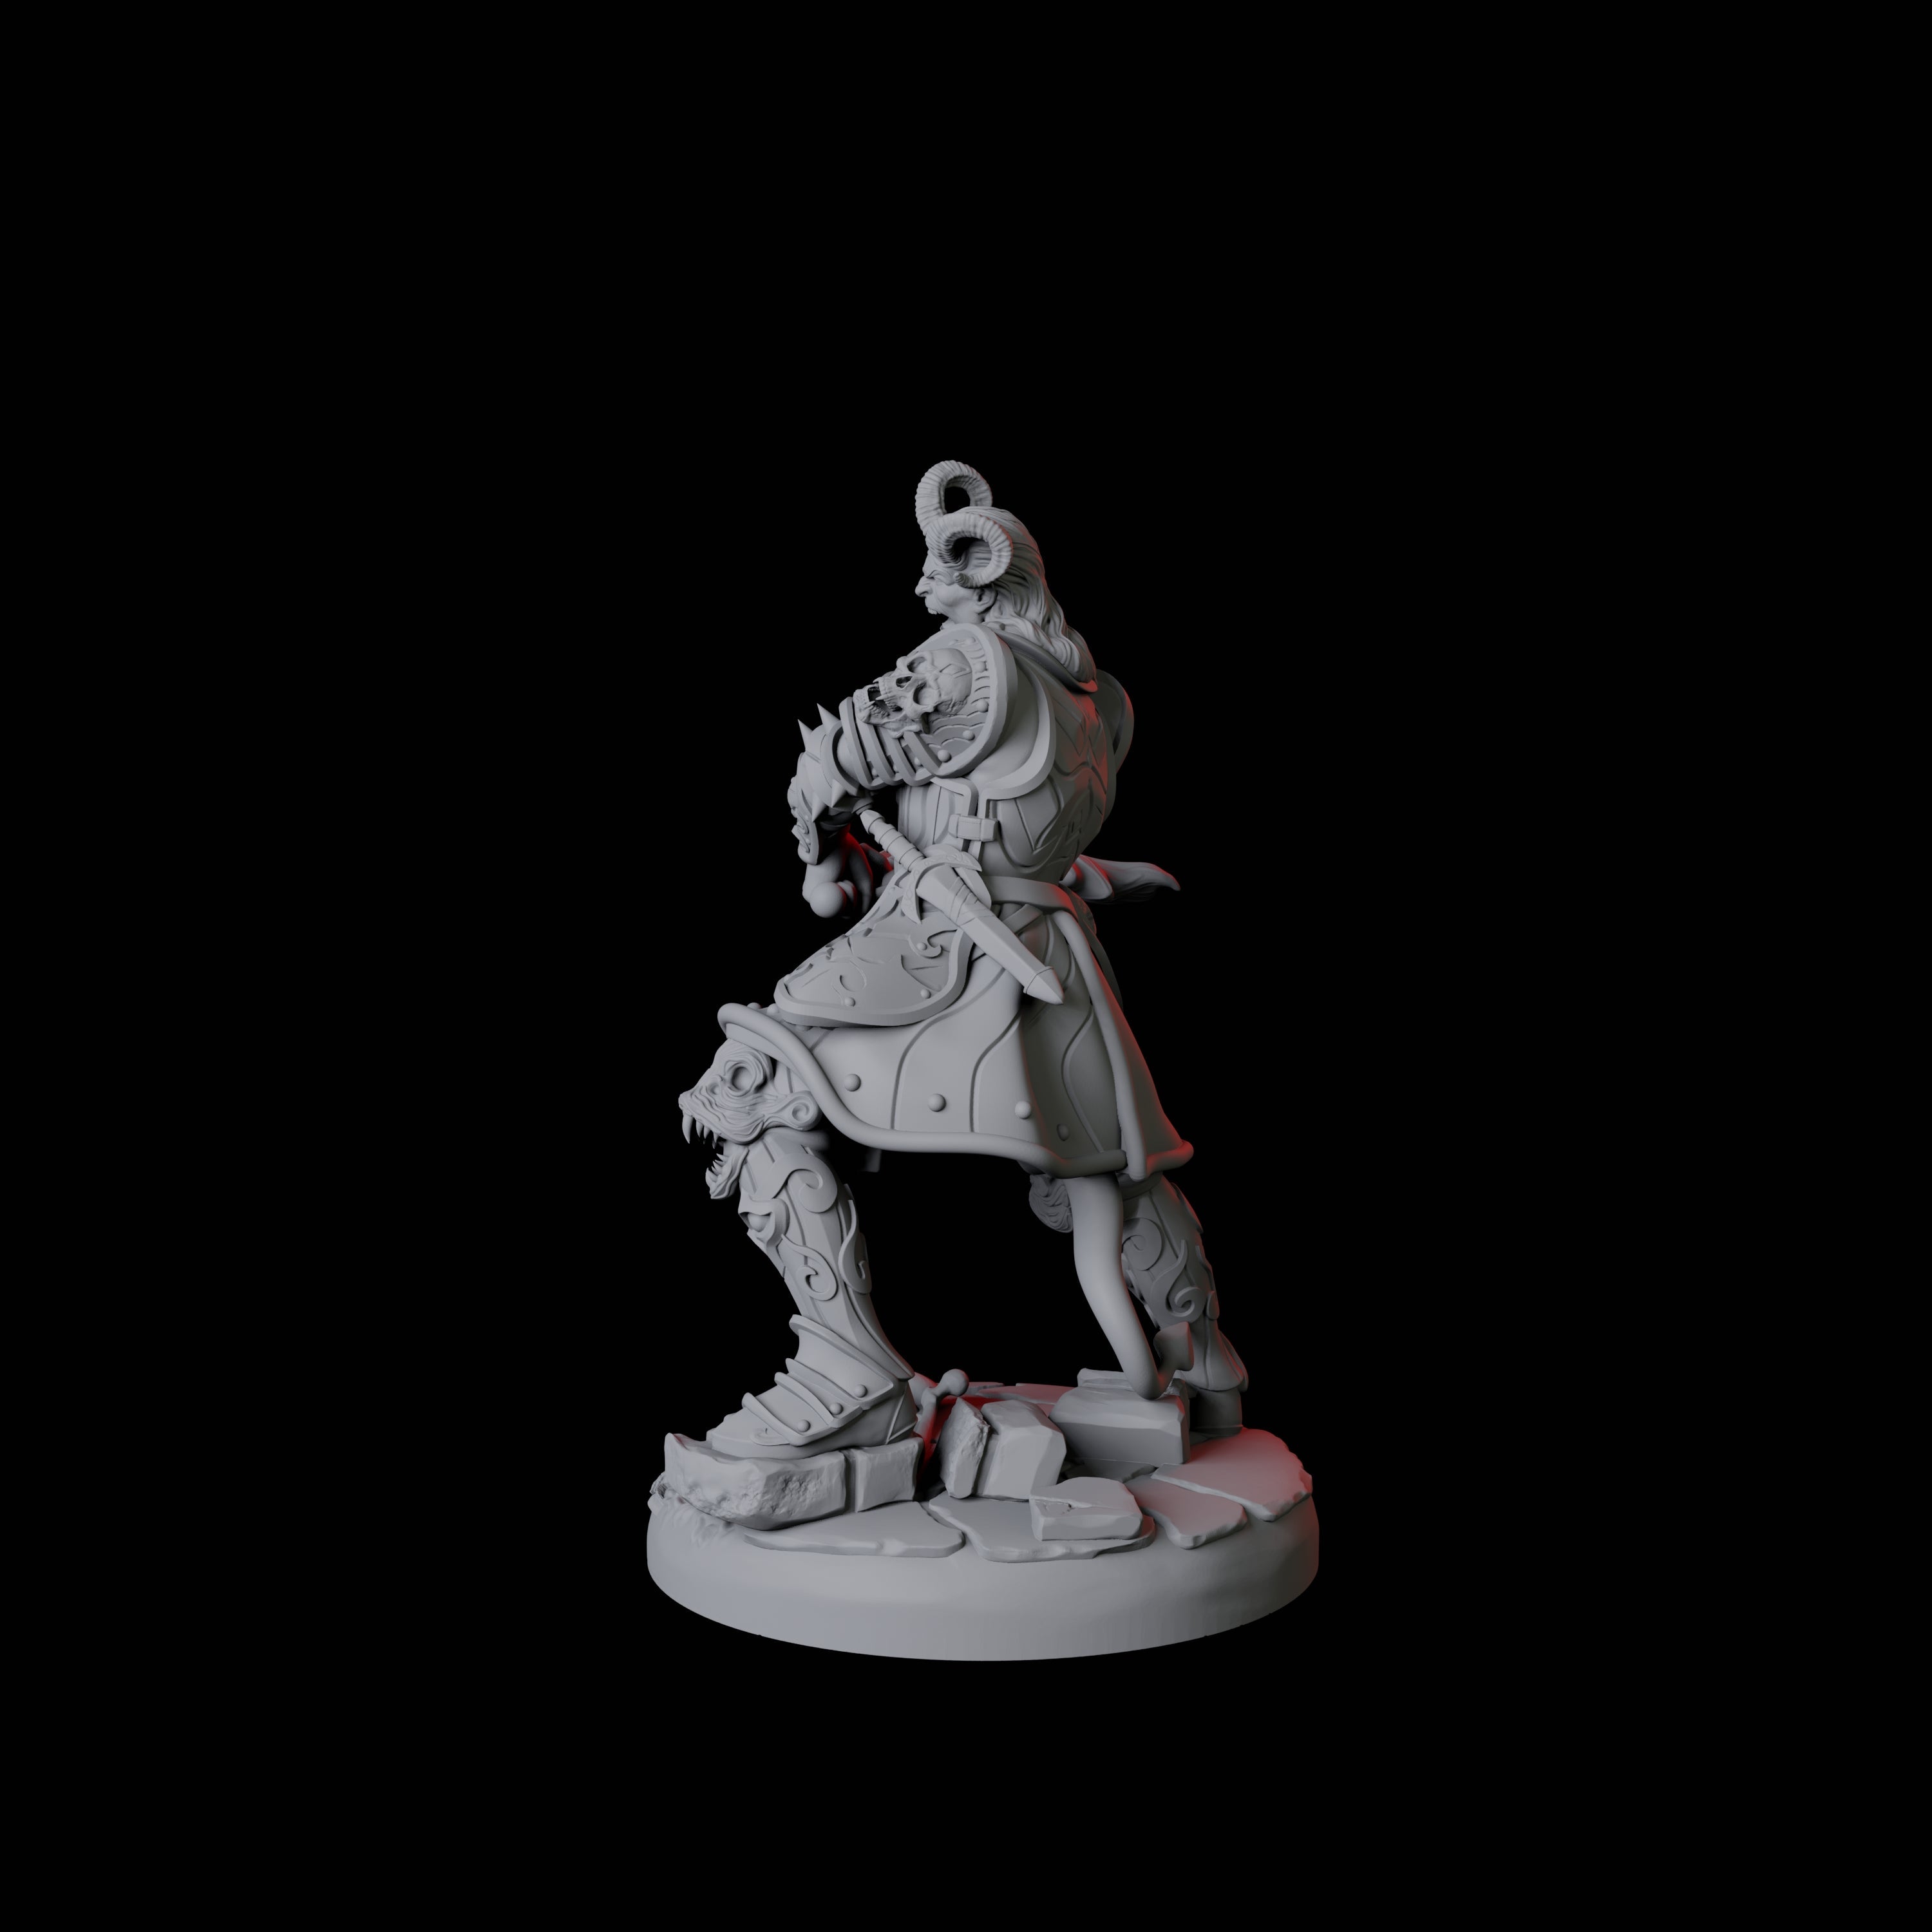 Threatening Bearded Devil B Miniature for Dungeons and Dragons, Pathfinder or other TTRPGs